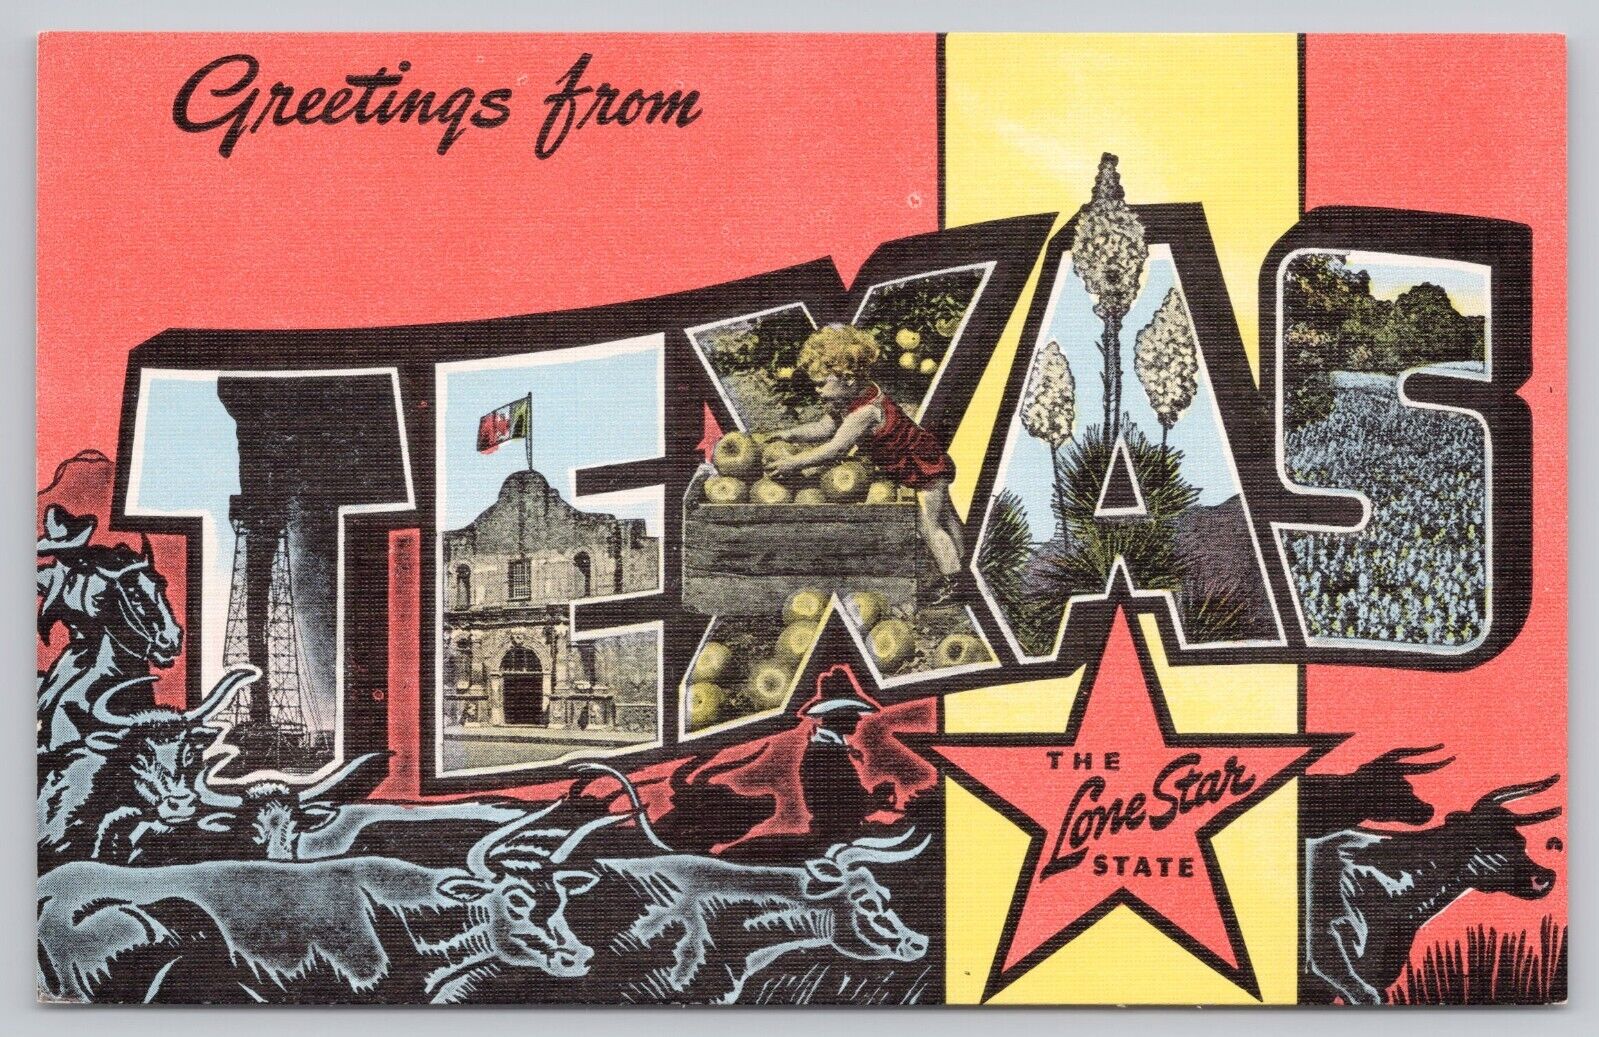 Texas, Large Letter Greetings, Lone Star State Cowboy Cattle, Vintage Postcard